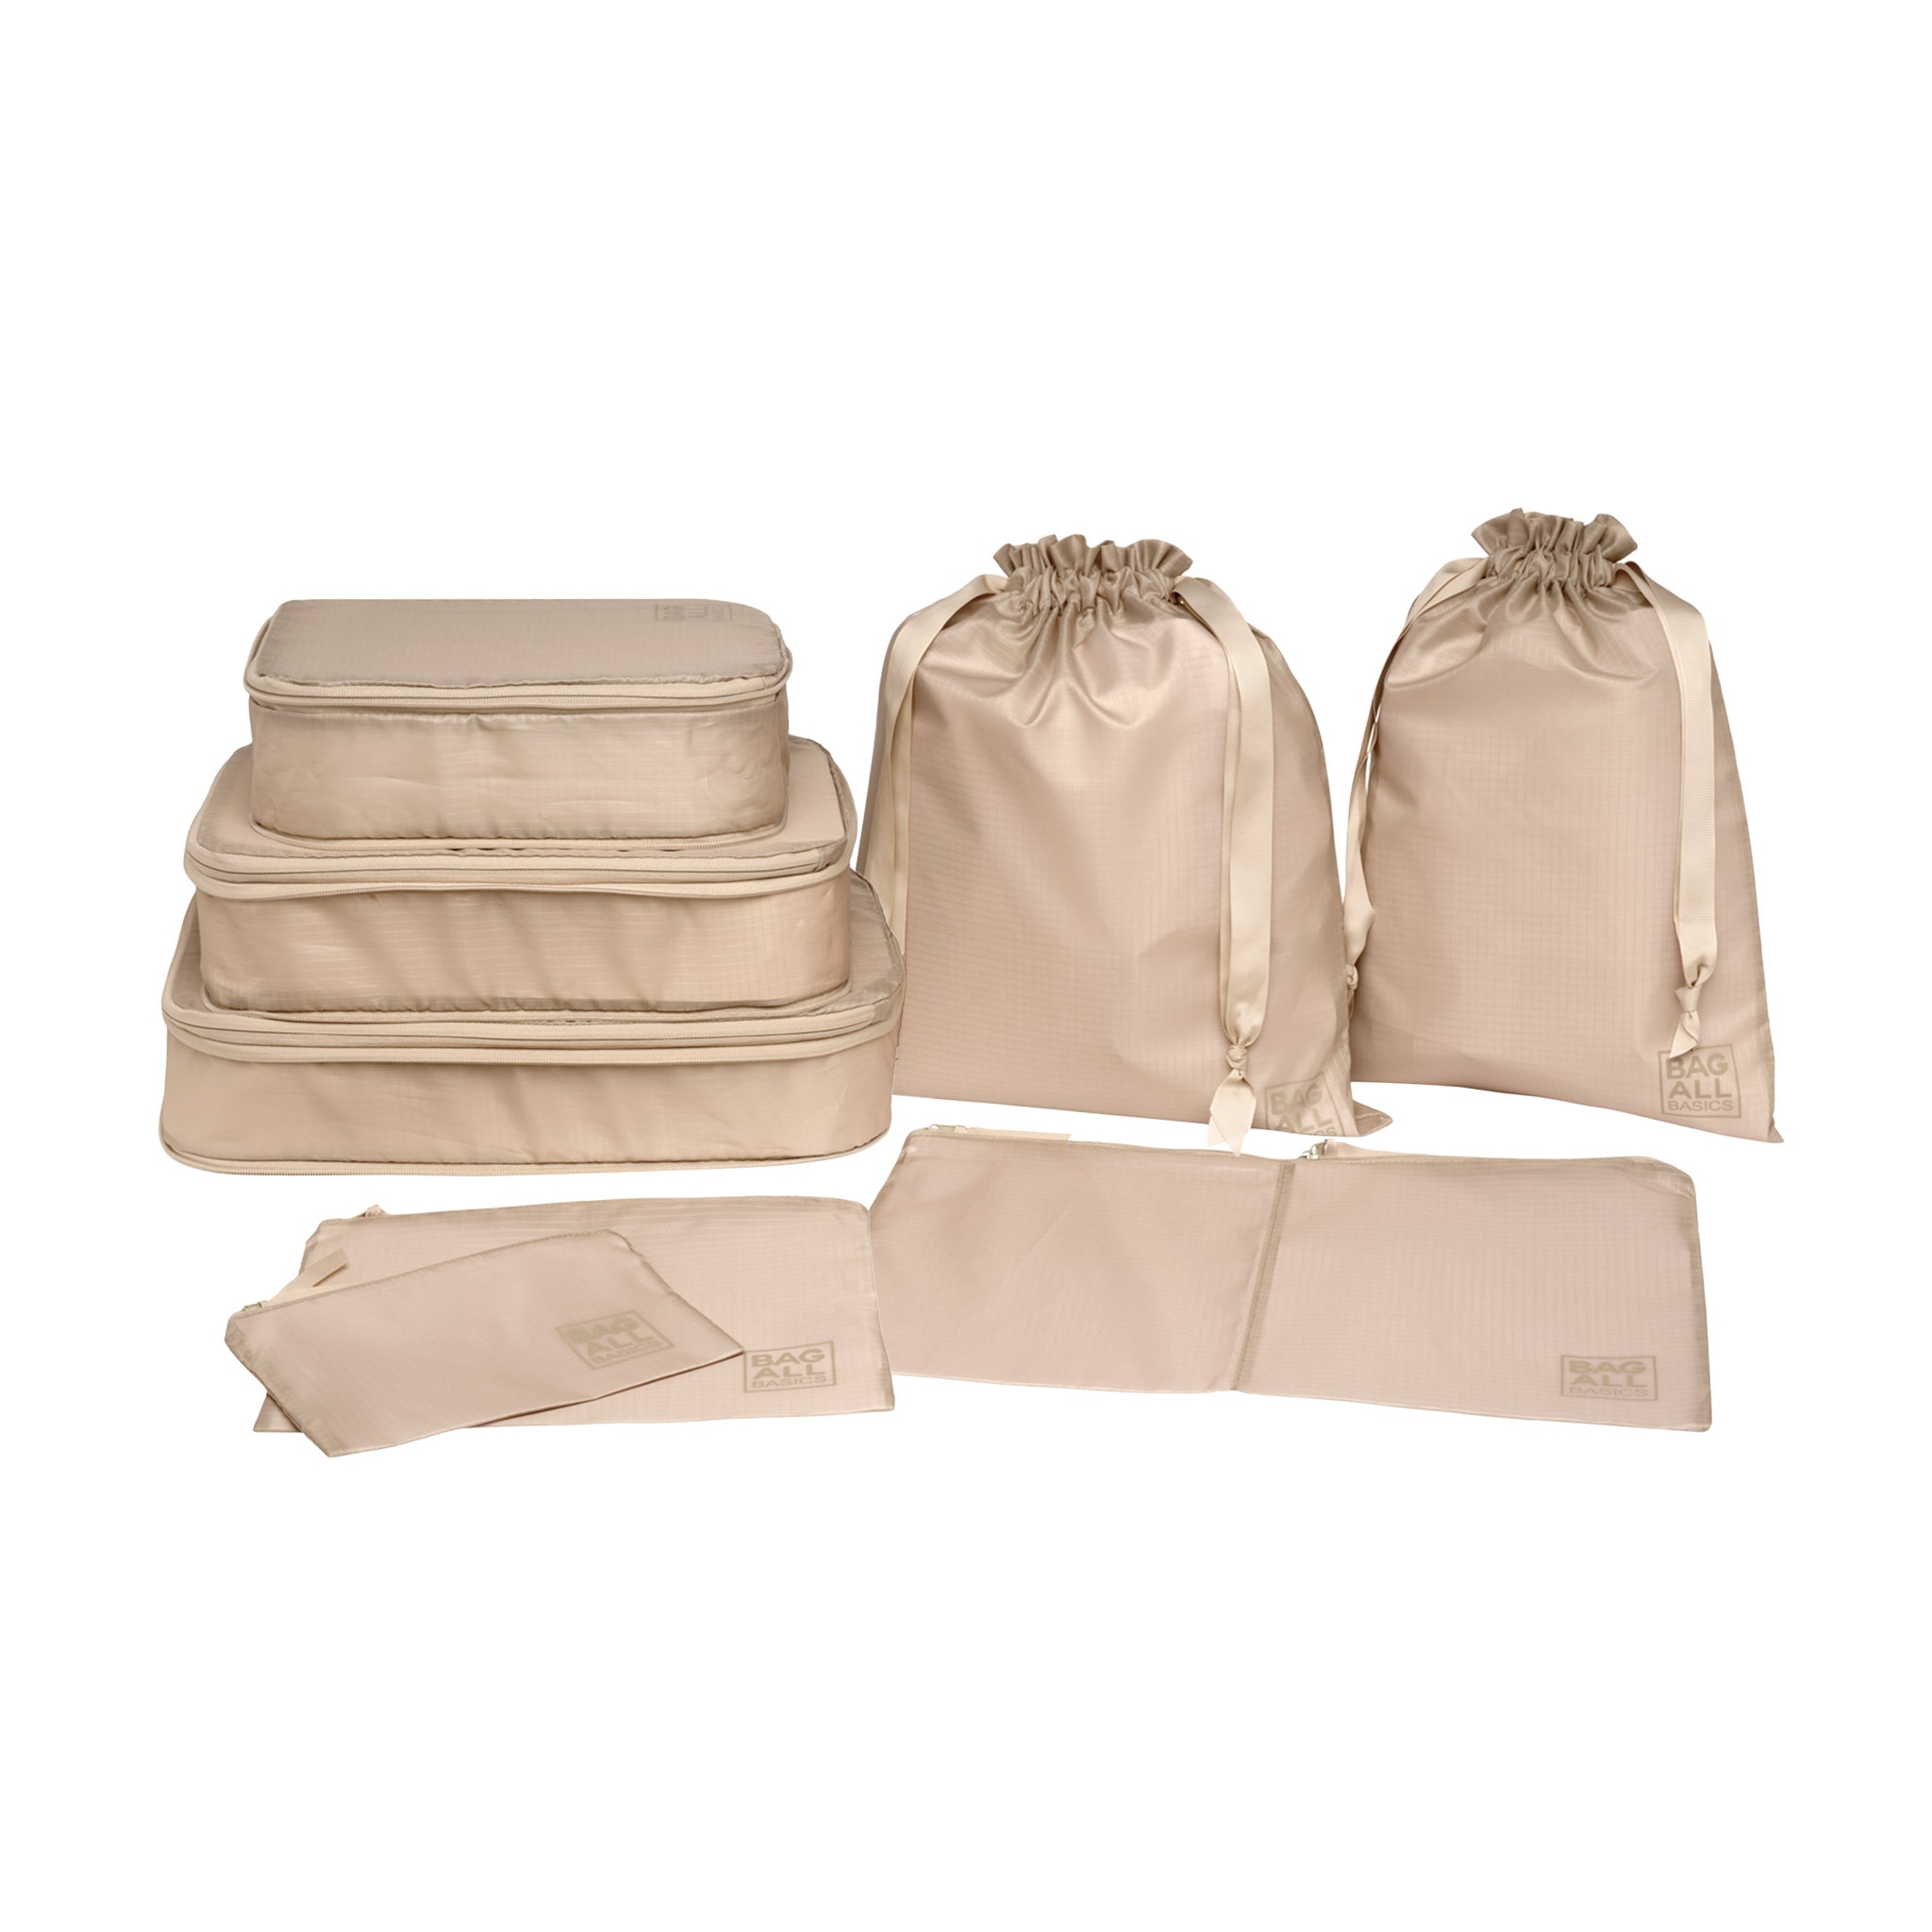 Bag-all Basic Packing Bags Set, 8-pack, Taupe | Bag-all